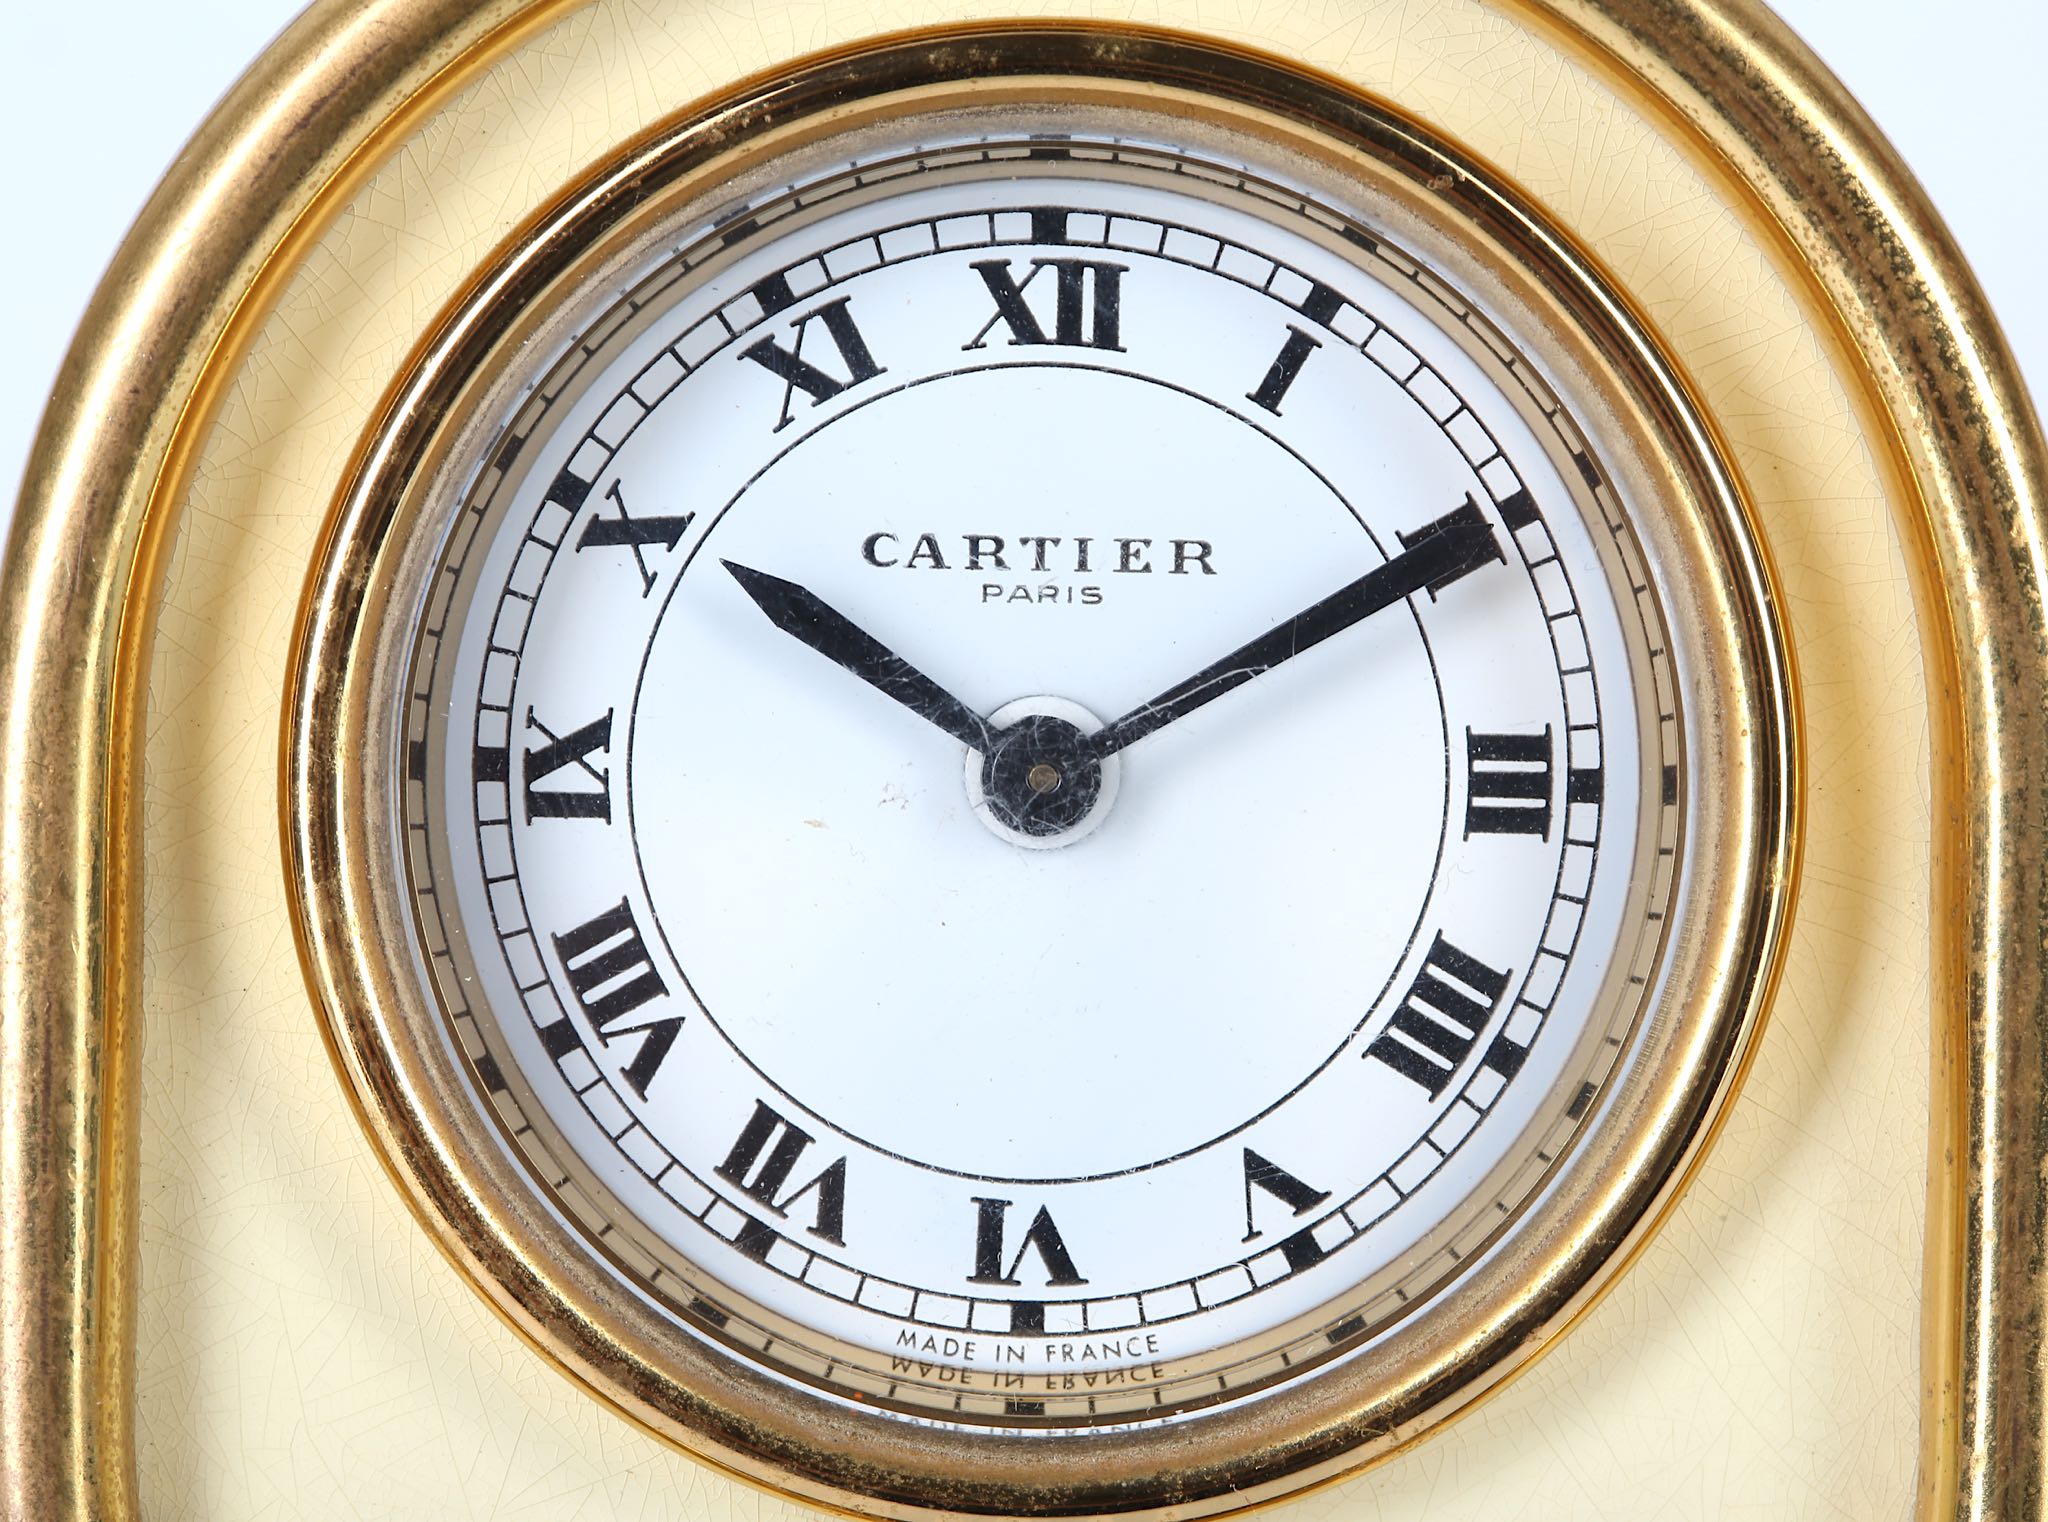 A LATE 20TH CENTURY CARTIER GILT BRASS ALARM CLOCK of arched frame form with cream enamel - Image 4 of 5